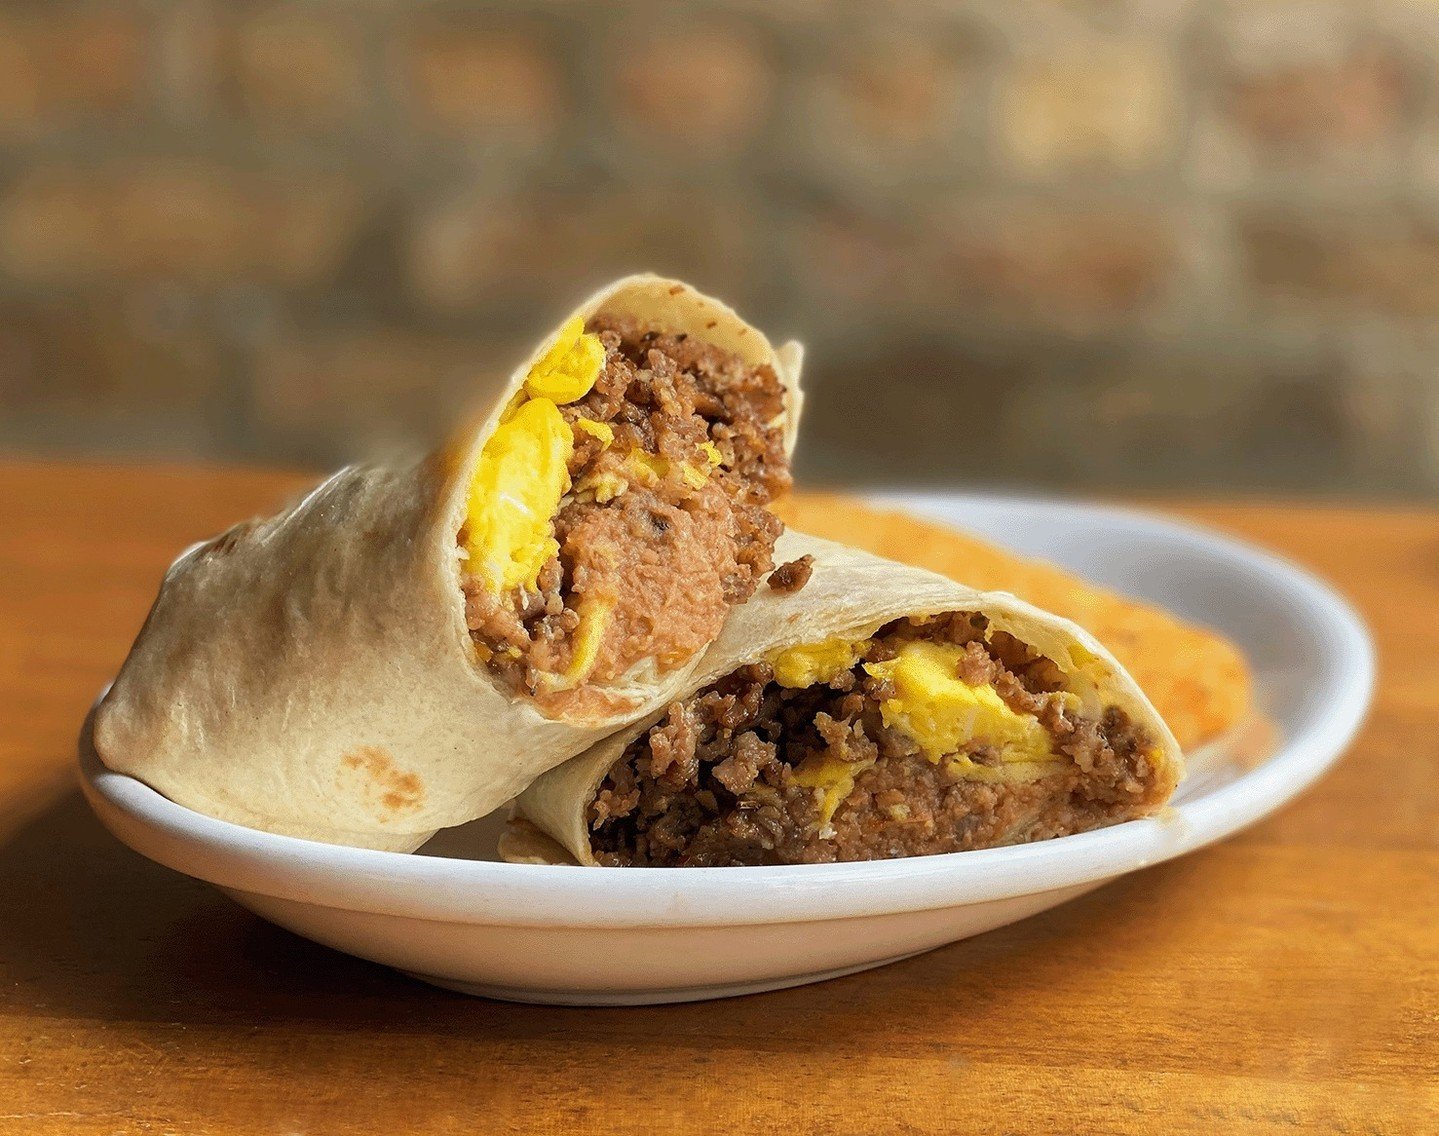 April is National Brunch Month - did you know you can order brunch at Mac's all day, every day, no matter the month? Choose from selections such as a Breakfast Burrito with scrambled eggs, breakfast sausage, cheddar jack, refried beans and housemade 